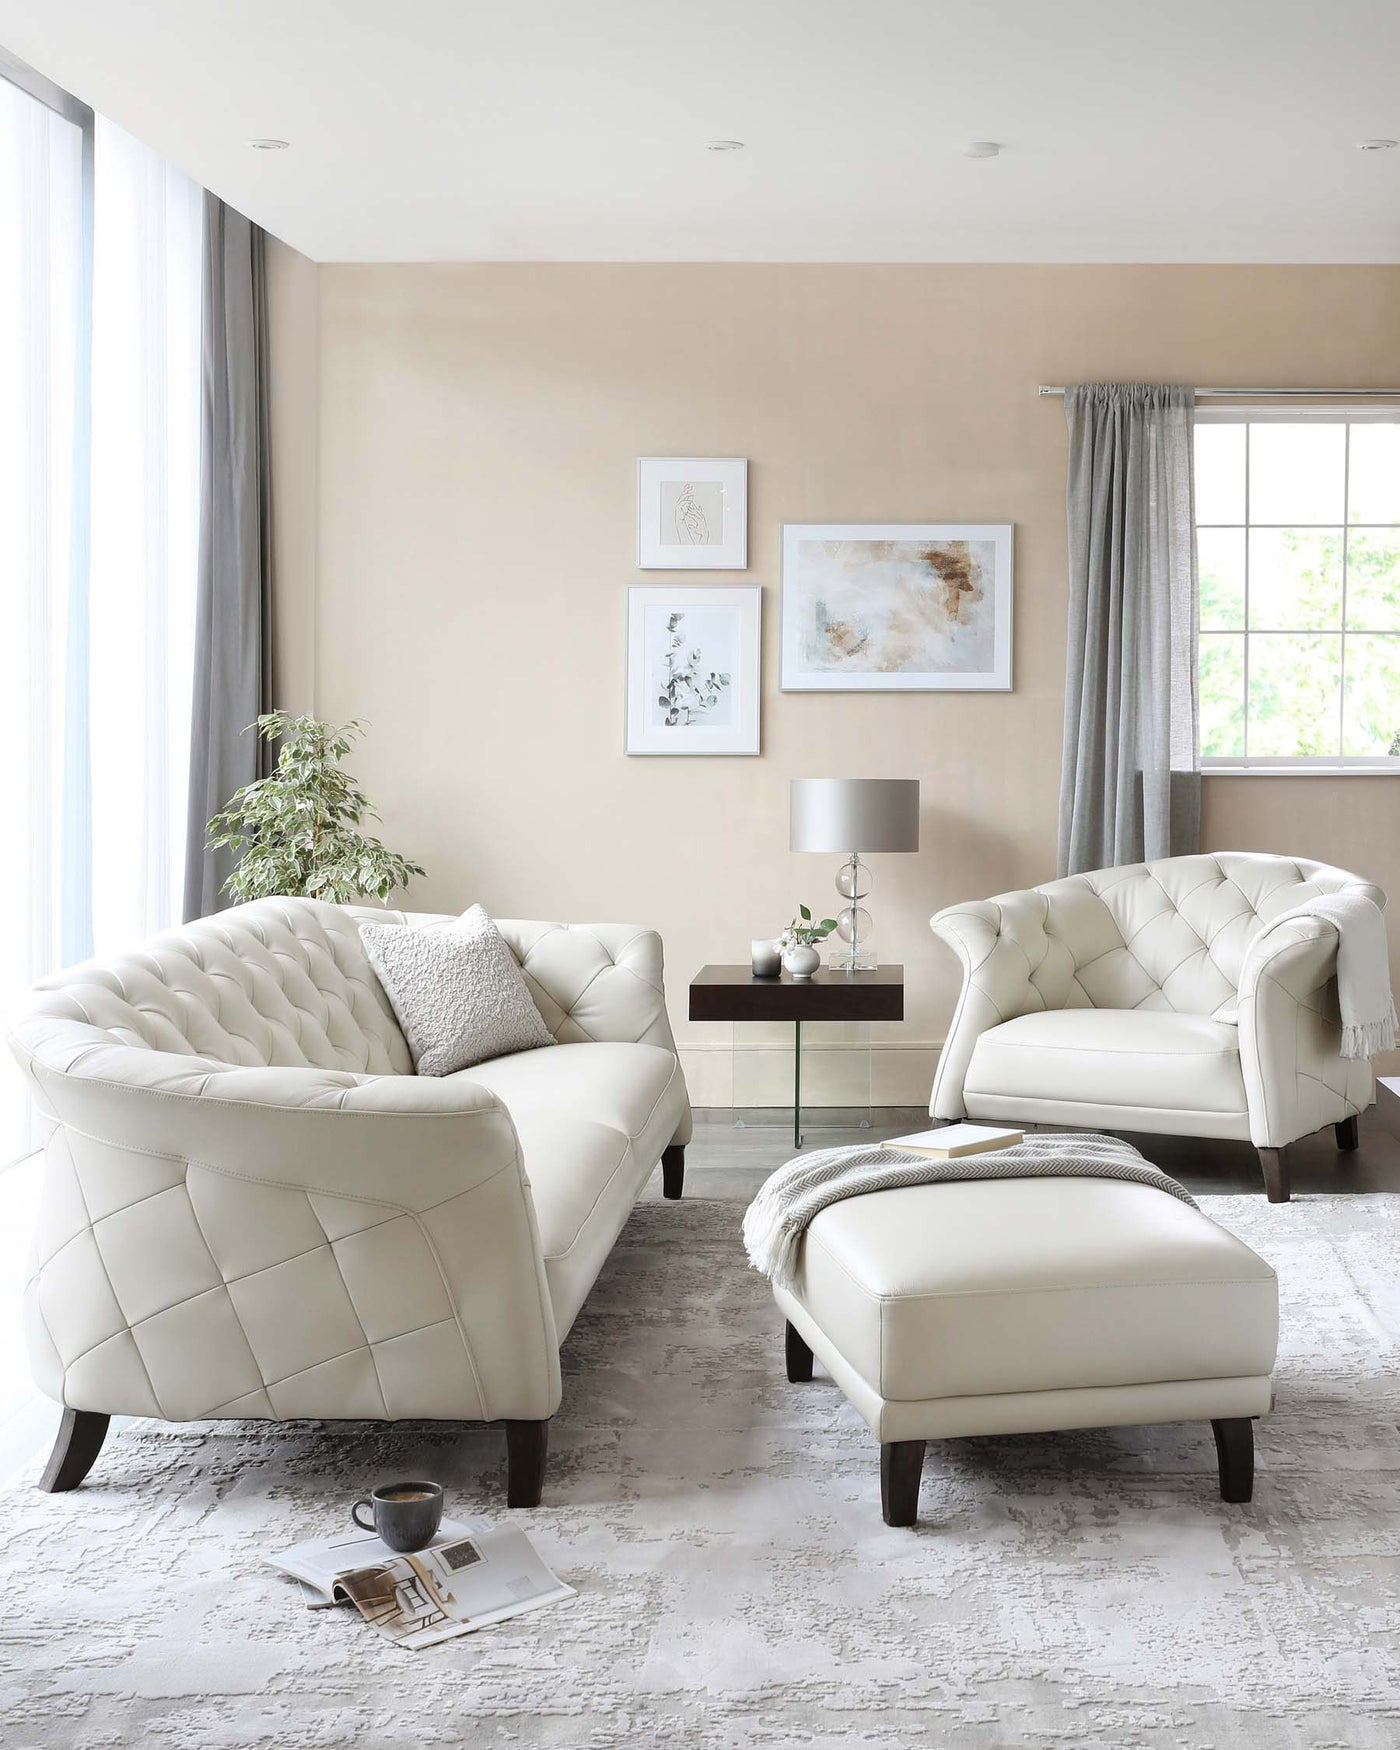 Elegant living room set featuring a cream-colored tufted leather sofa with matching armchair and ottoman, all with a diamond stitching pattern and dark wooden legs. A modern rectangular wooden side table with a sleek lamp enhances the set, which is arranged on a textured grey and white area rug, creating a luxurious and inviting space.